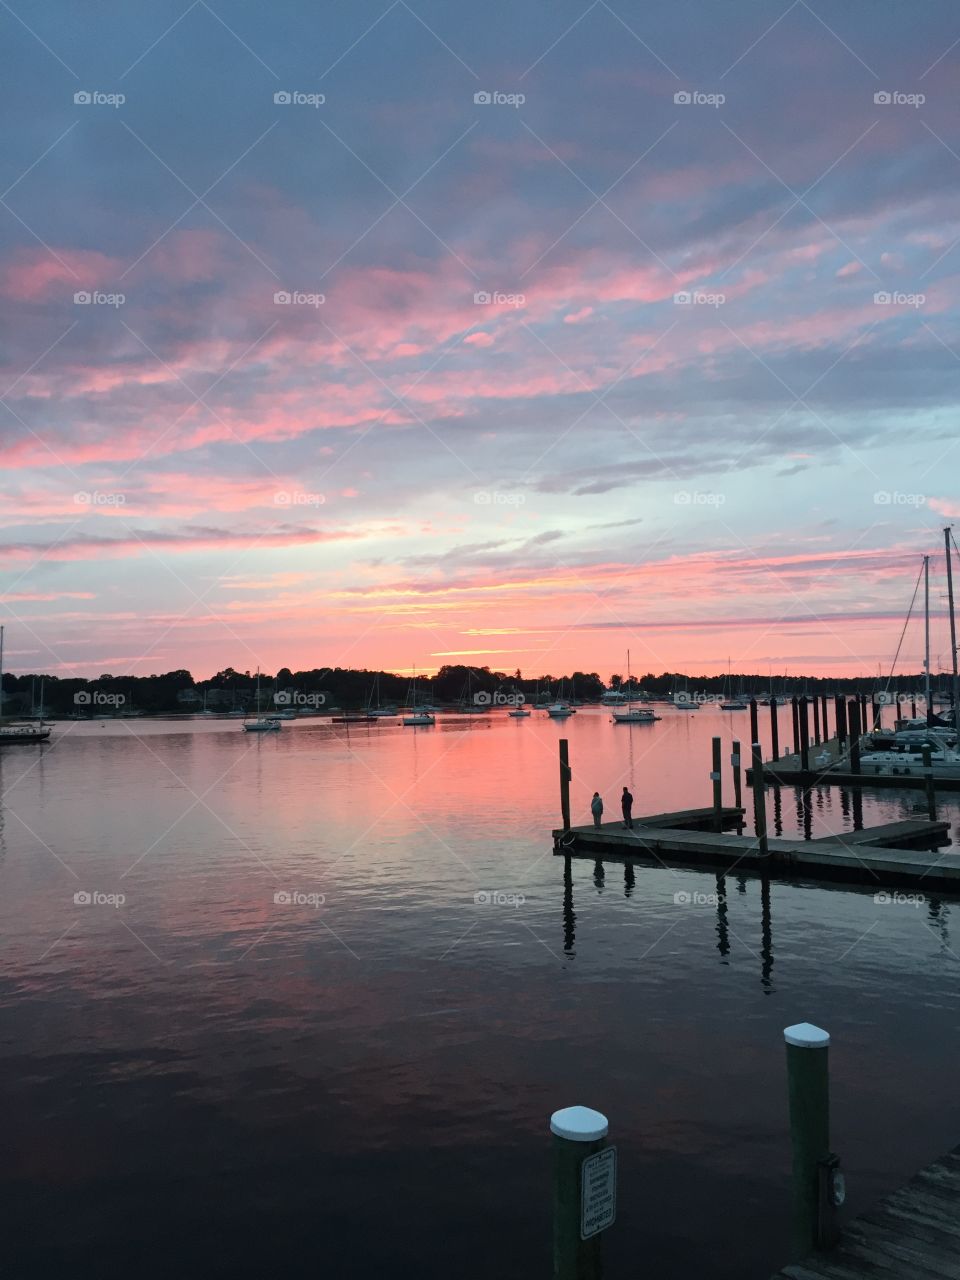 Sunset over the Harbor 